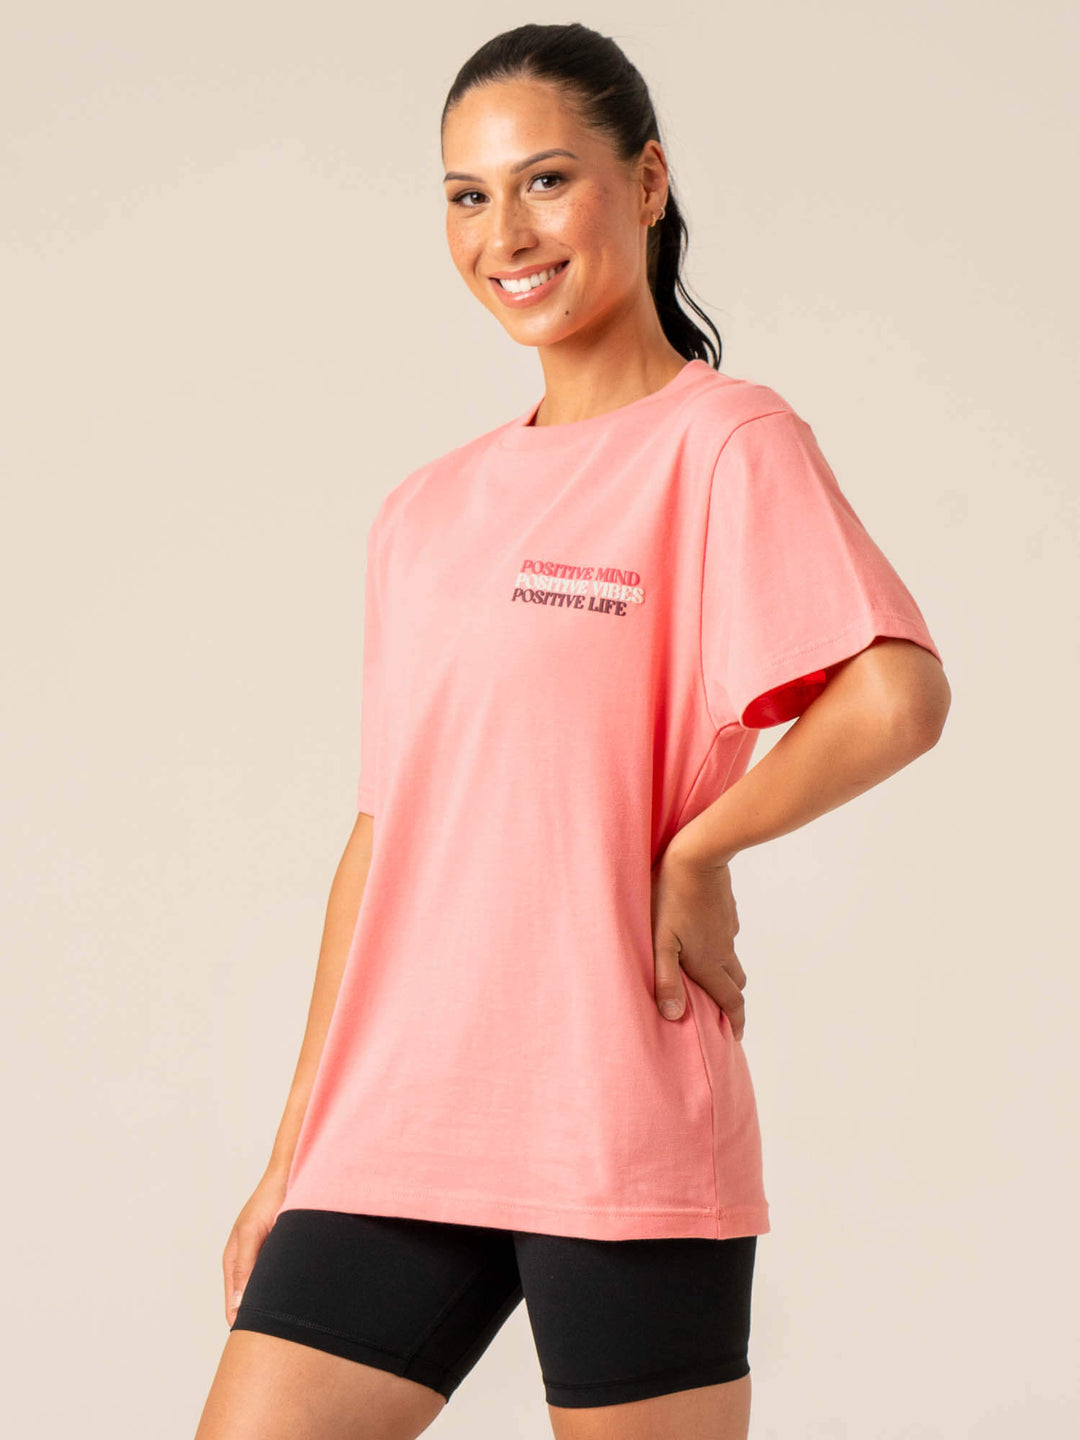 Positive Vibes T-Shirt - Pink Clothing Ryderwear 